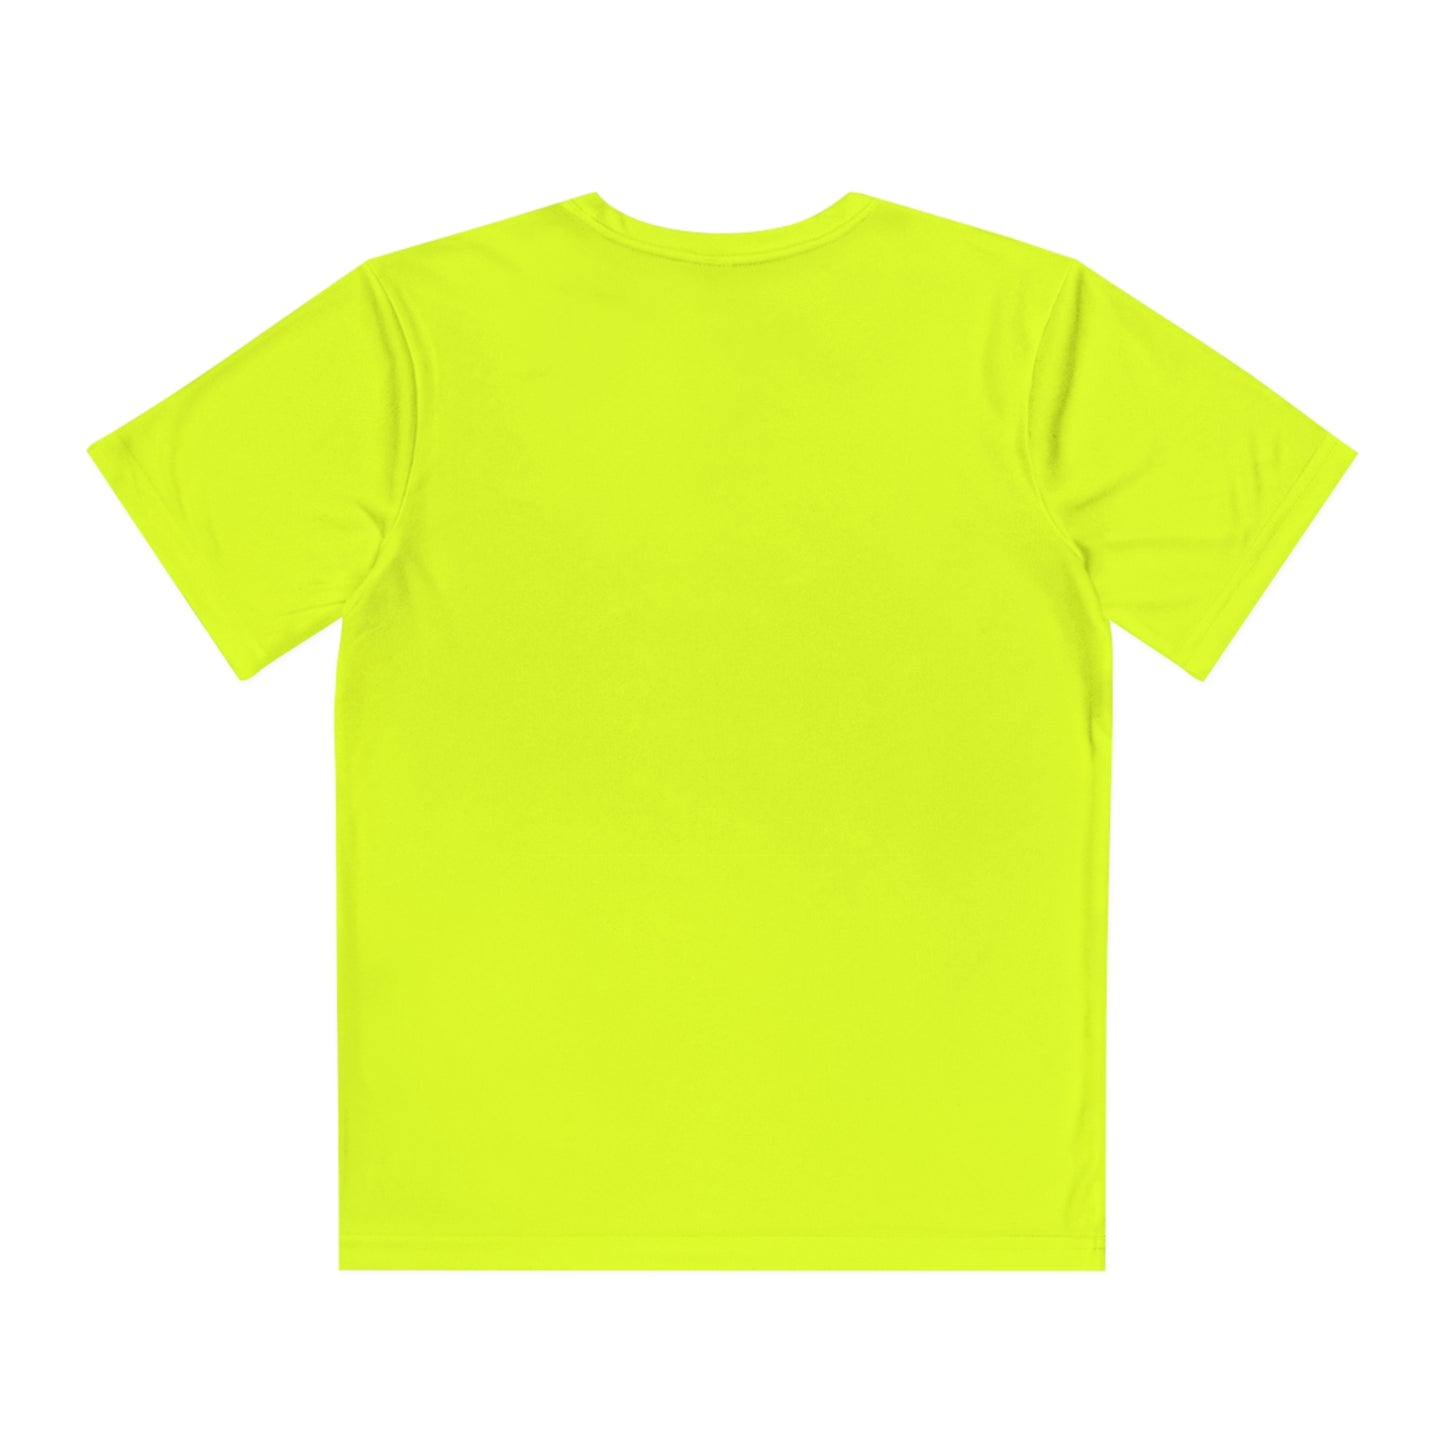 St Patrick Athletics Youth Competitor Tee